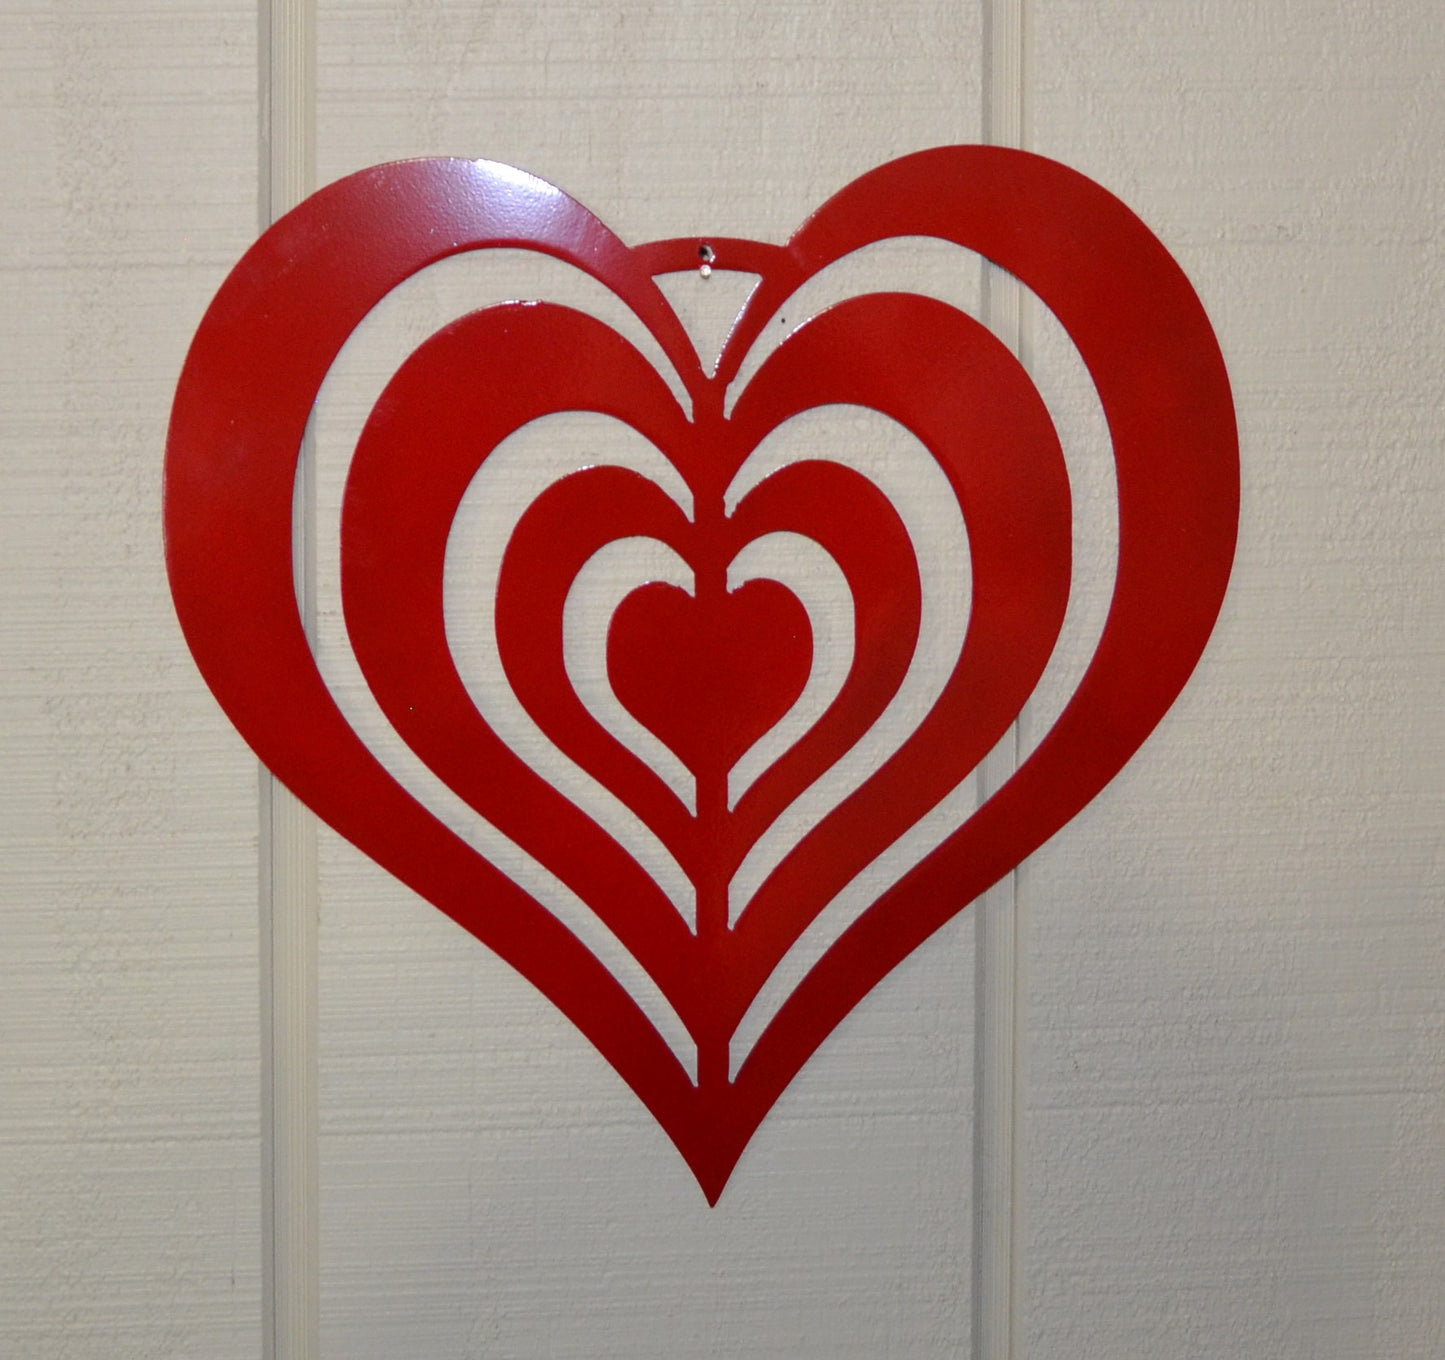 Heart of Hearts, Valentine's, Gift, Home Decor, Wall Art, Metal Decoration, New Home Owners